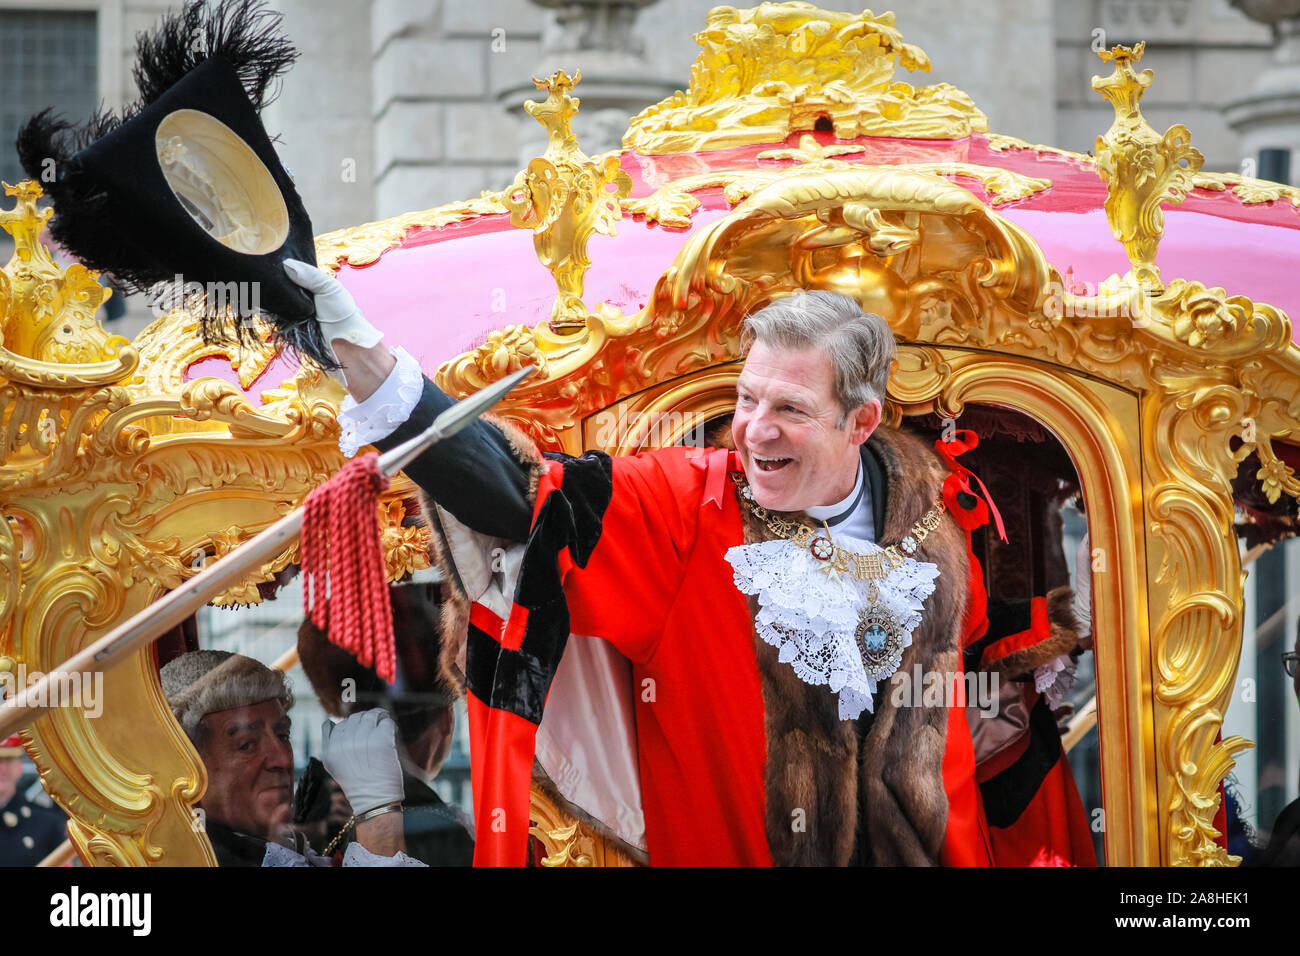 City of London, London, UK, 09th November 2019.  The 692nd Lord Mayor of London, Alderman William Russell, waves from the golden State Coach at St Paul's as the crowds cheer on the parade. The annual Lord Mayor's Show, a parade through the City of London that is 804 years old and this year features over 6000 participants, sees marching bands, military detachments, carriages, dance troupes, inflatables and many others make their way from Mansion House, via St Paul's to the Royal Courts of Justice. Credit: Imageplotter/Alamy Live News Credit: Imageplotter/Alamy Live News Stock Photo